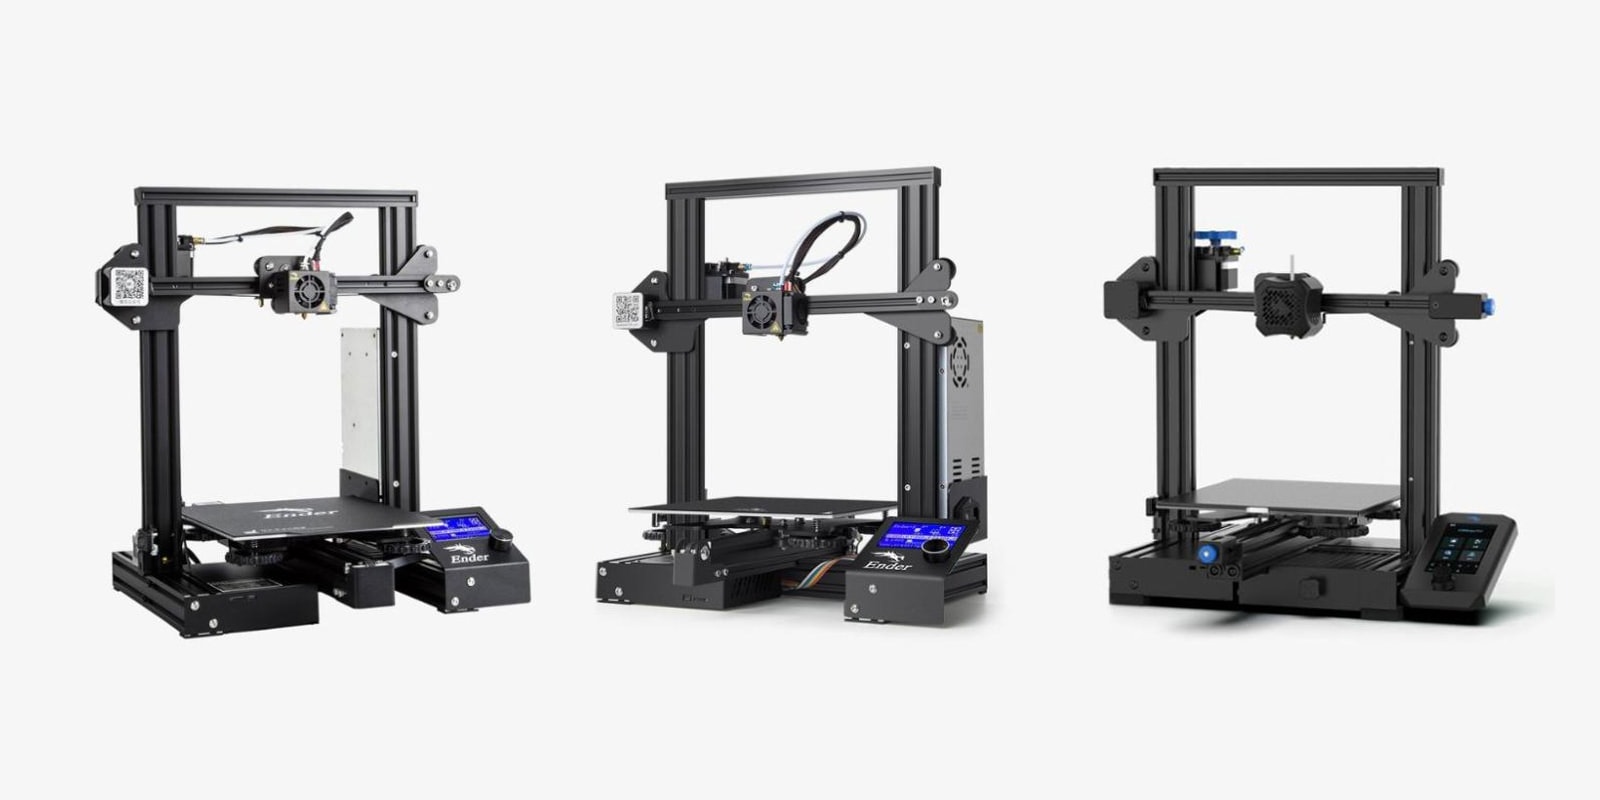 The difference between the Ender 3, Ender 3 Pro, and Ender 3 V2